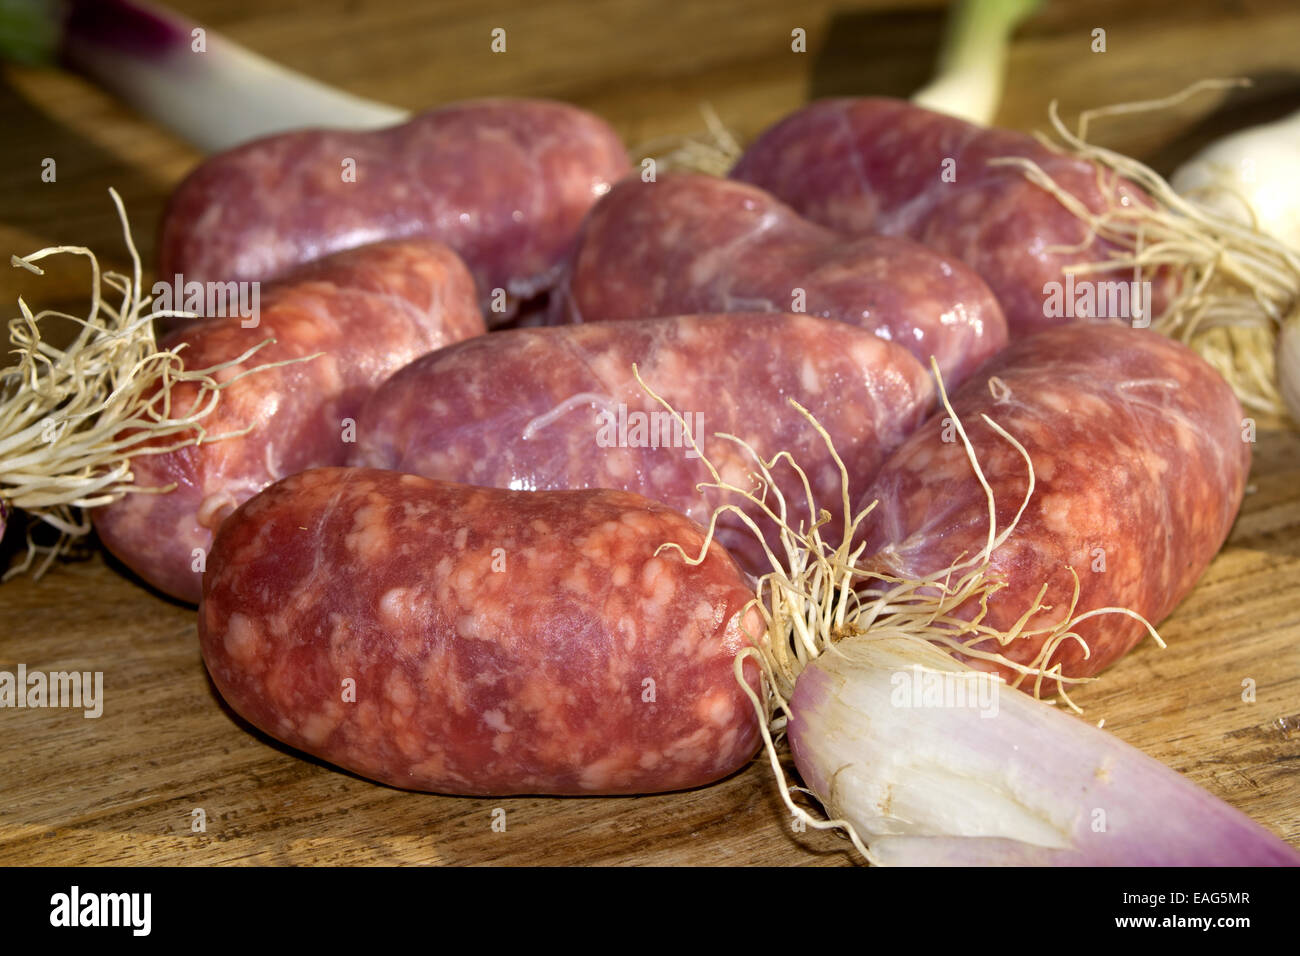 raw pork's sausages ready for the barbeque Stock Photo